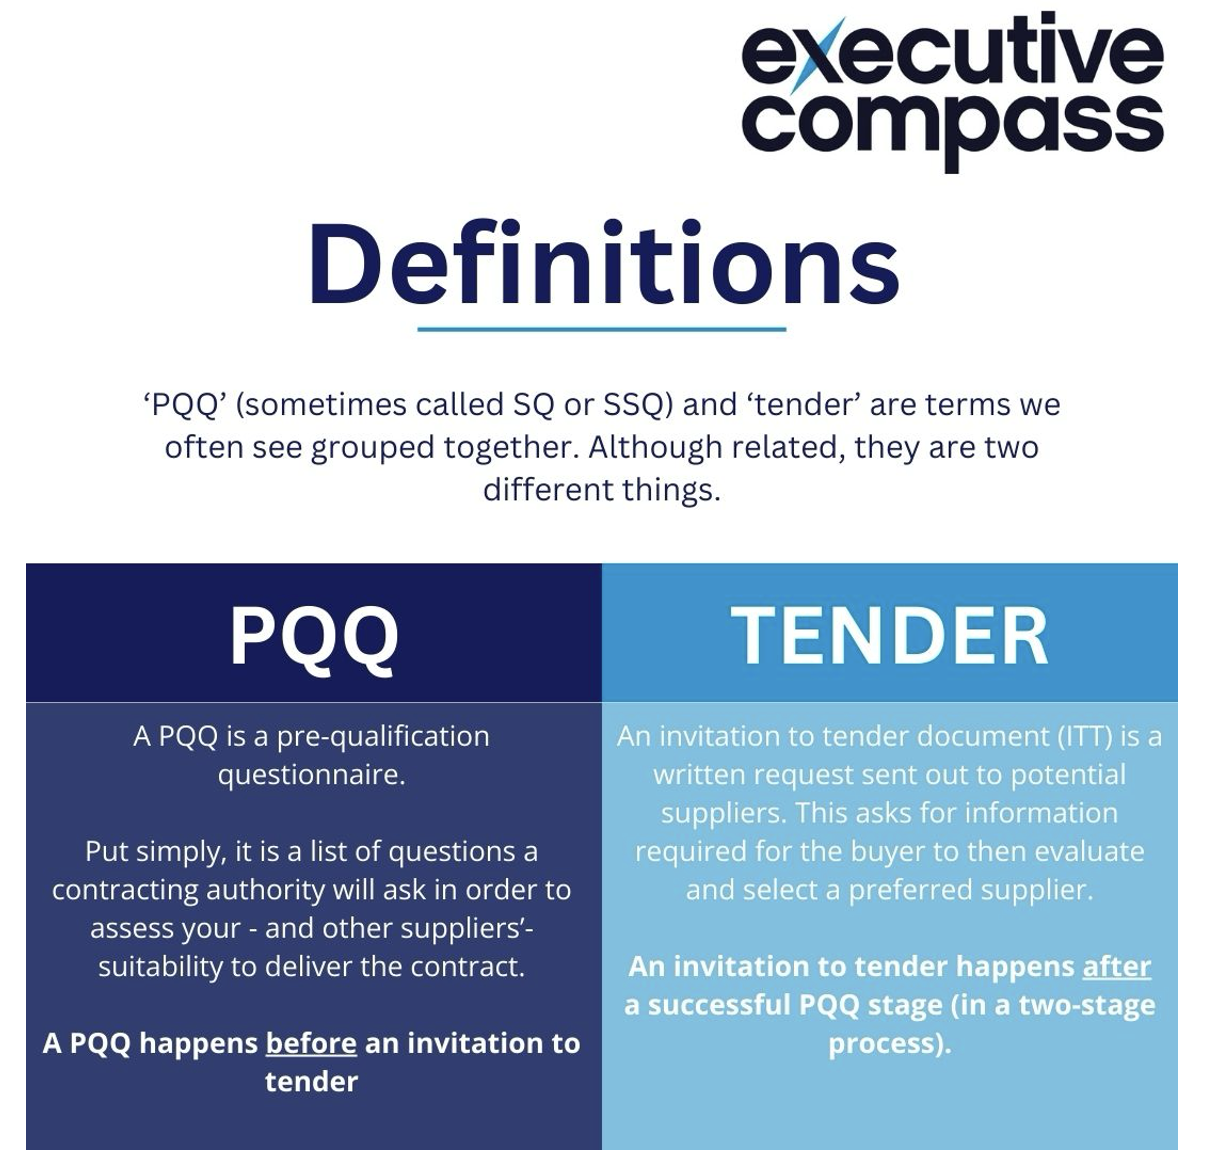 PQQ and Tender Definitions Infographic